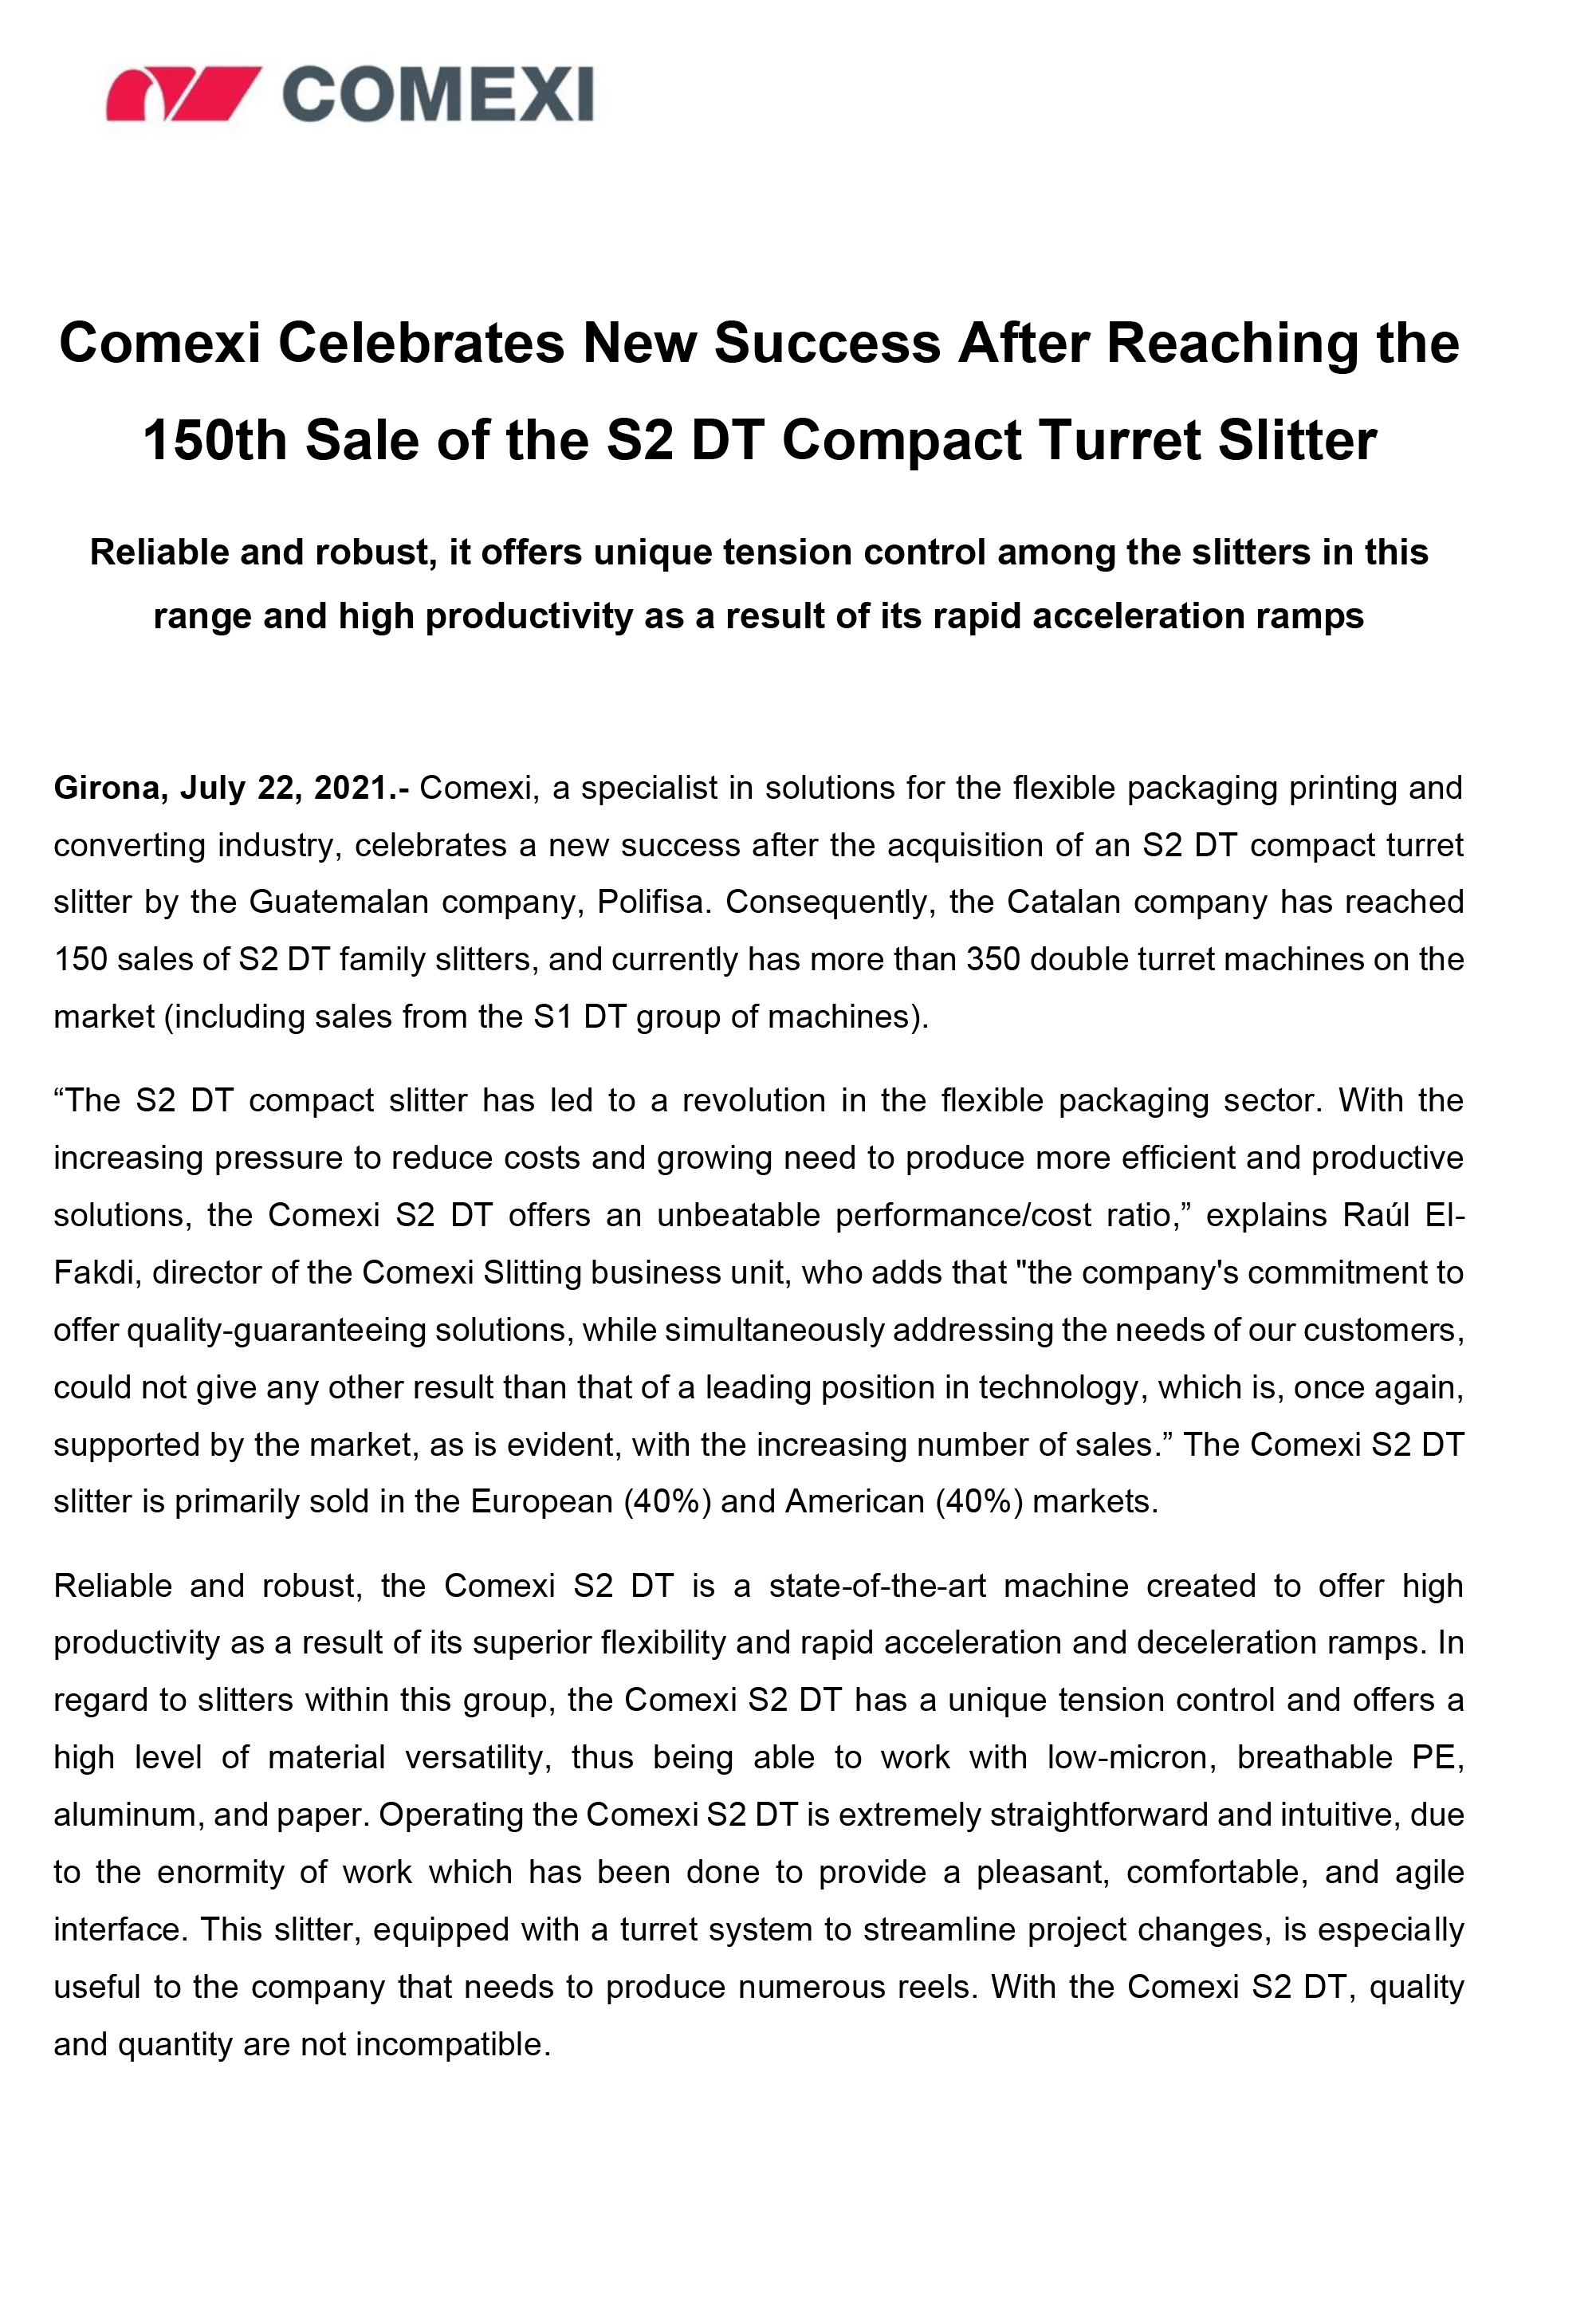 Comexi Celebrates New Success After Reaching the 150th Sale of the S2 DT Compact Turret Slitter